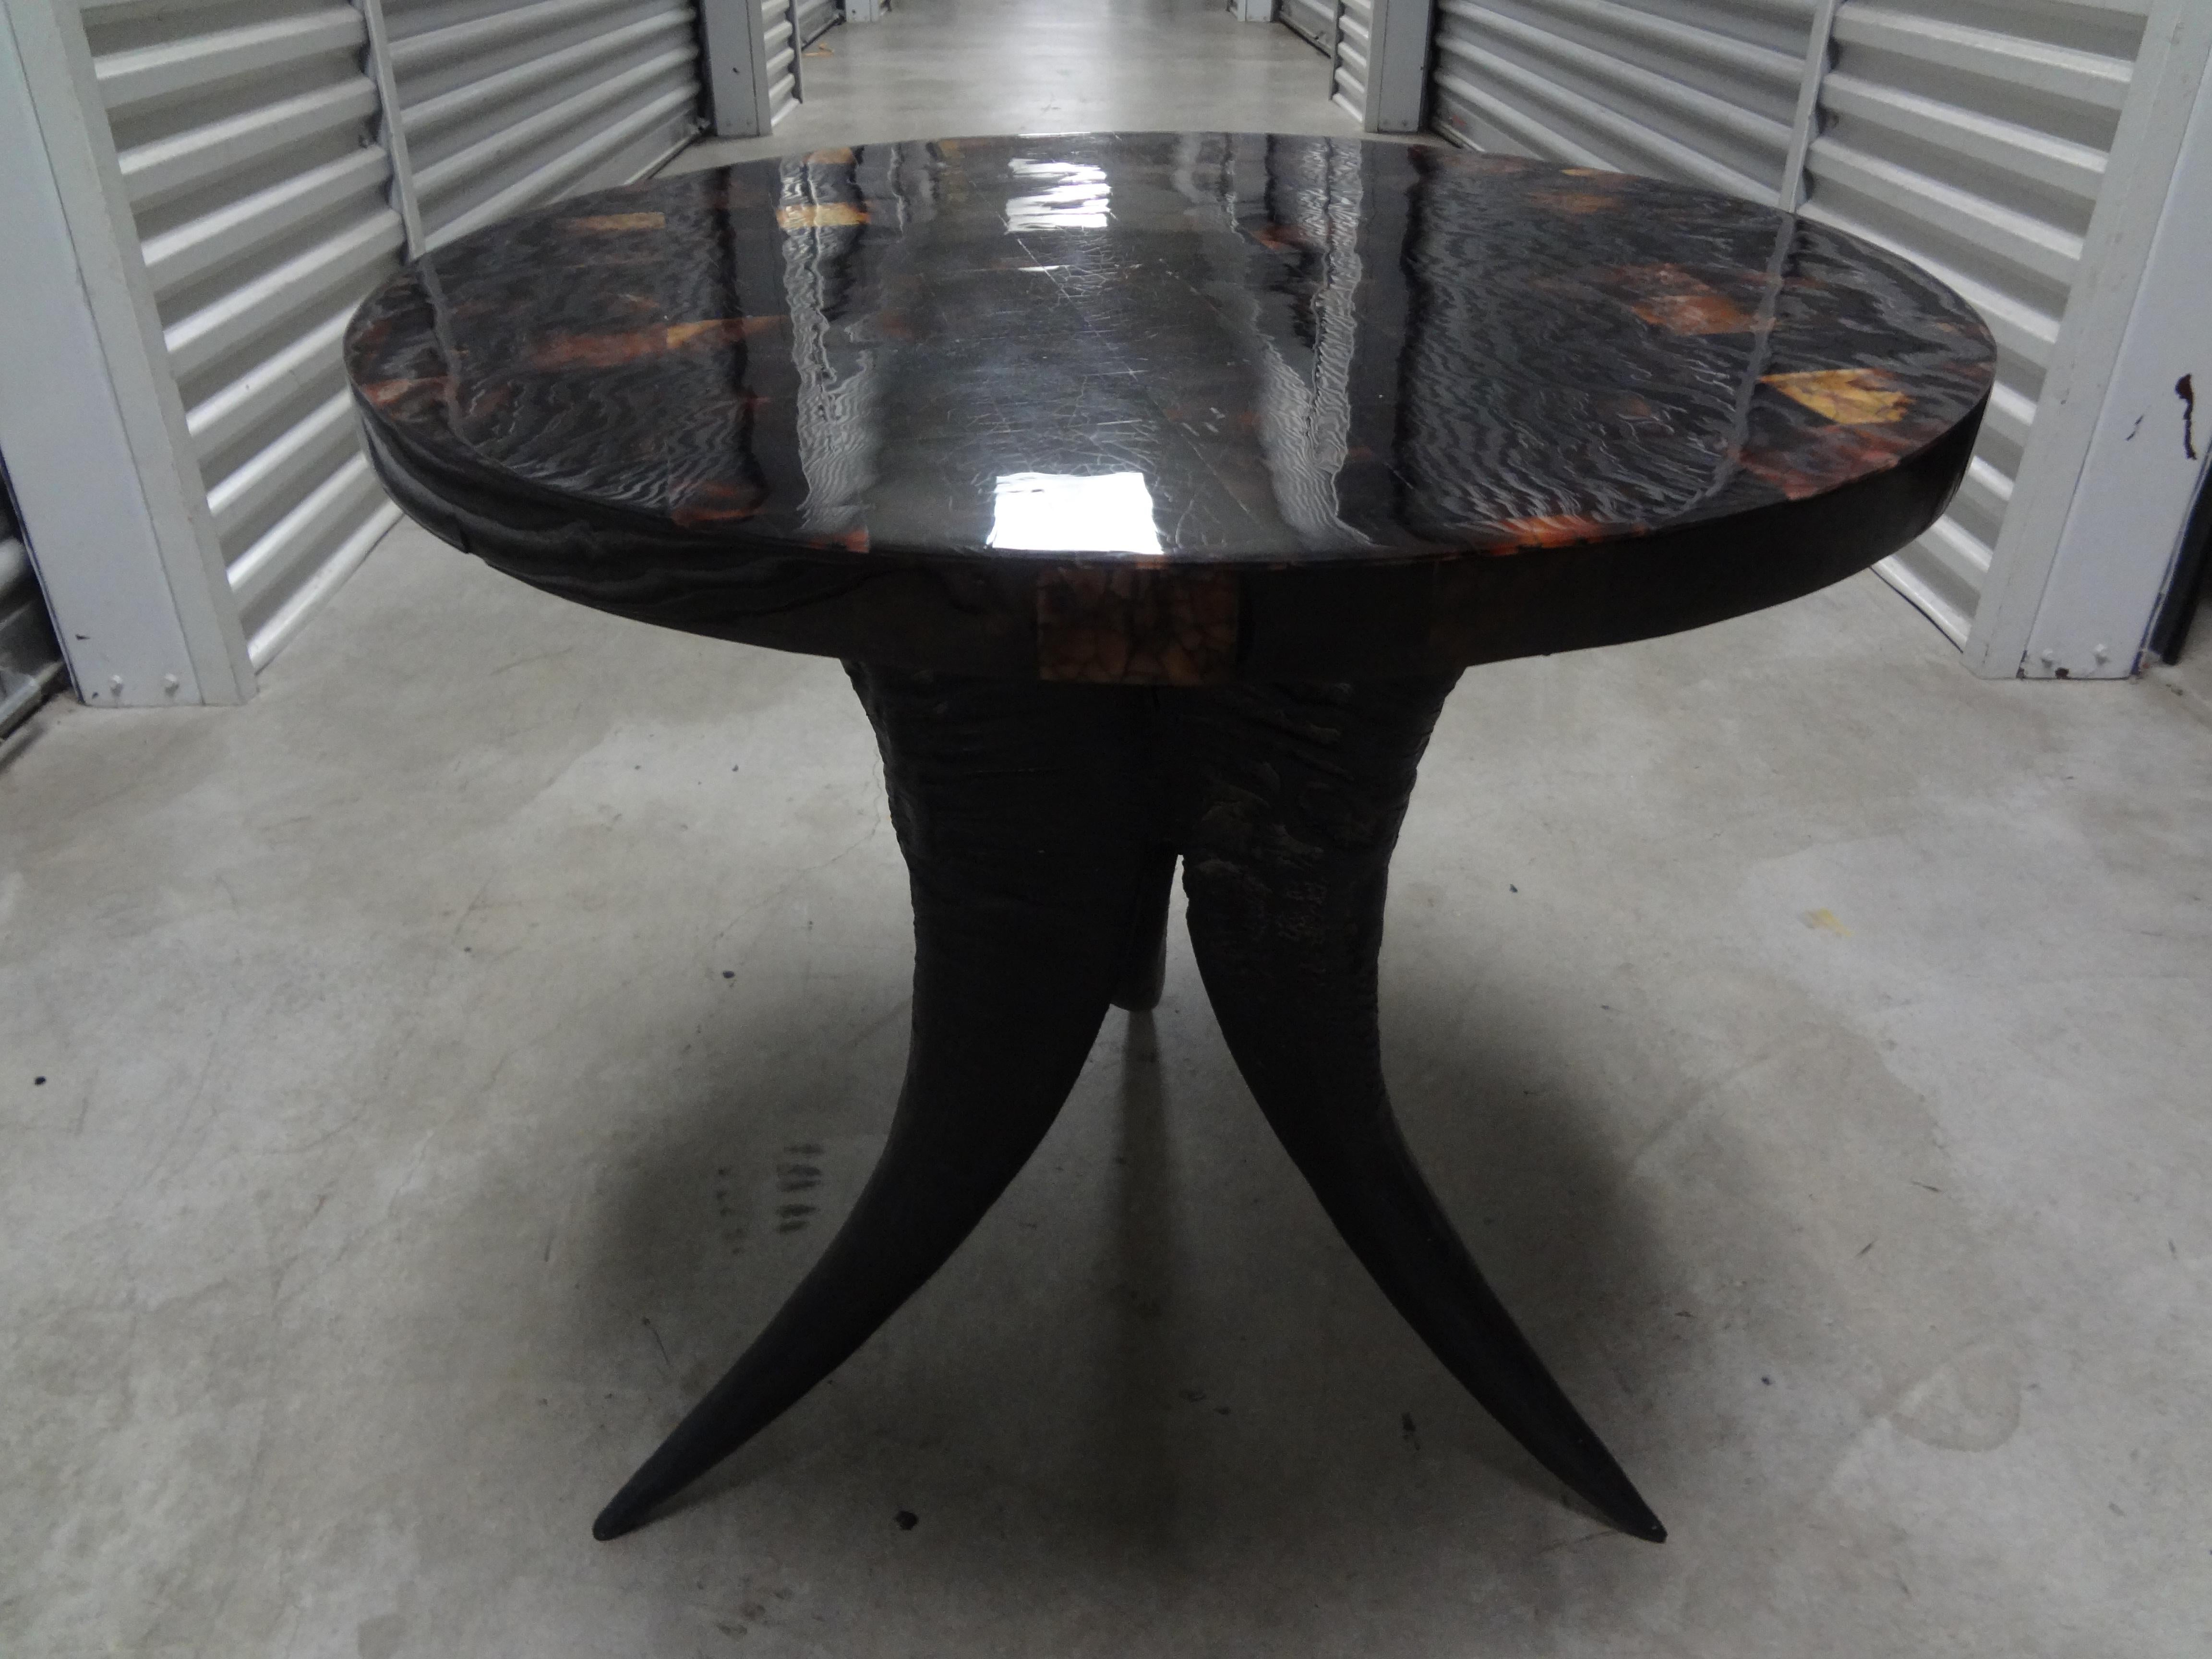 Handsome vintage horn table with faux horn legs and a tessellated horn top. This versatile 20th century Karl Springer inspired horn side table, drink table or gueridon would work well in a rustic, contemporary or traditional interior.